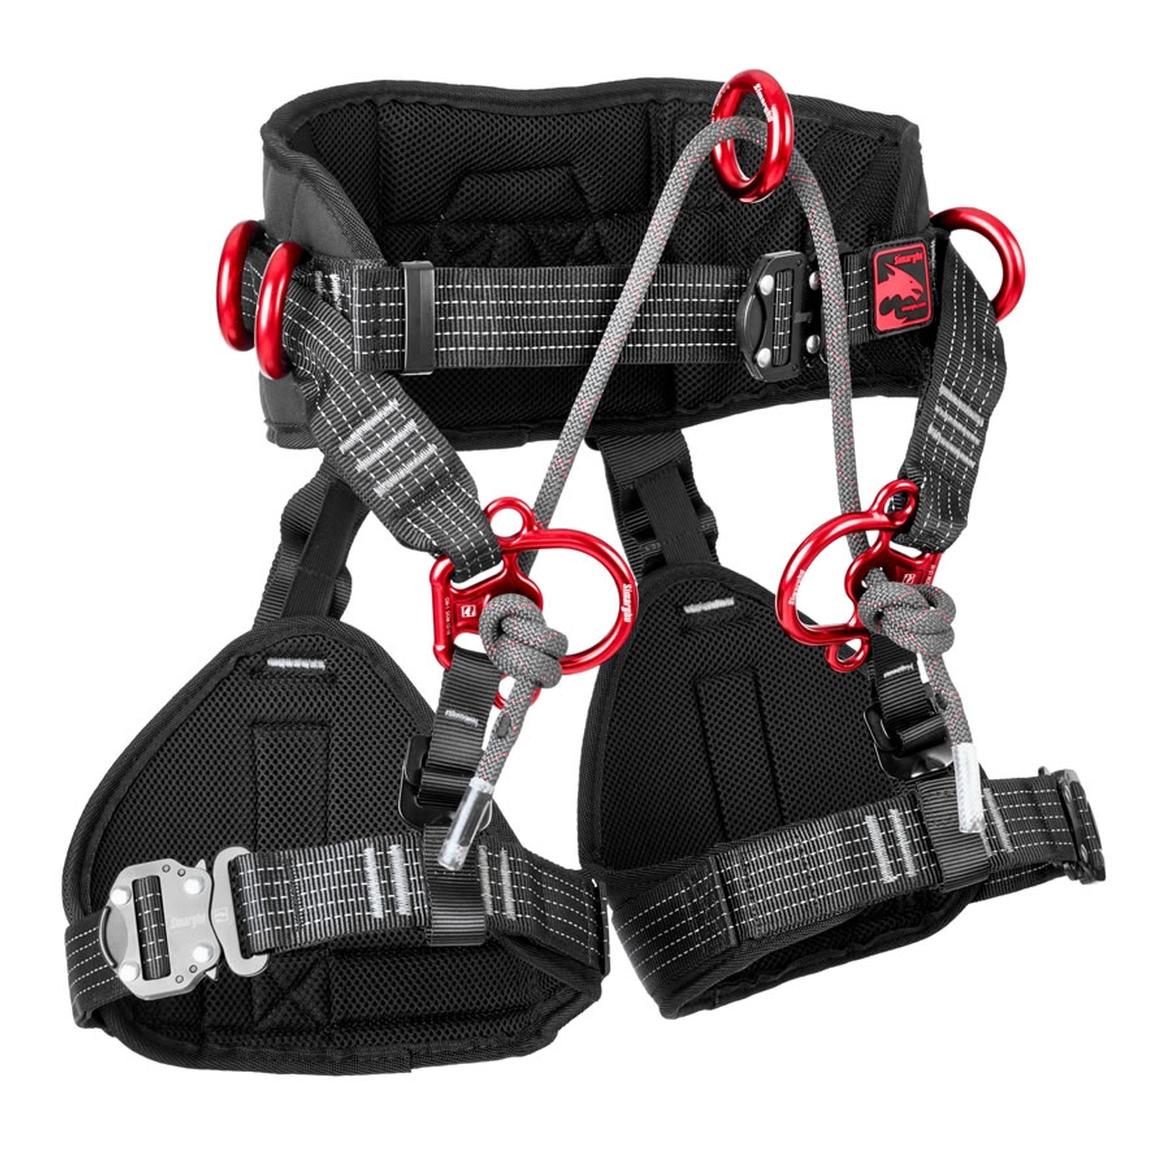 Simarghu Fire Male Climbing Harness (Fits 27 to 34 Waist